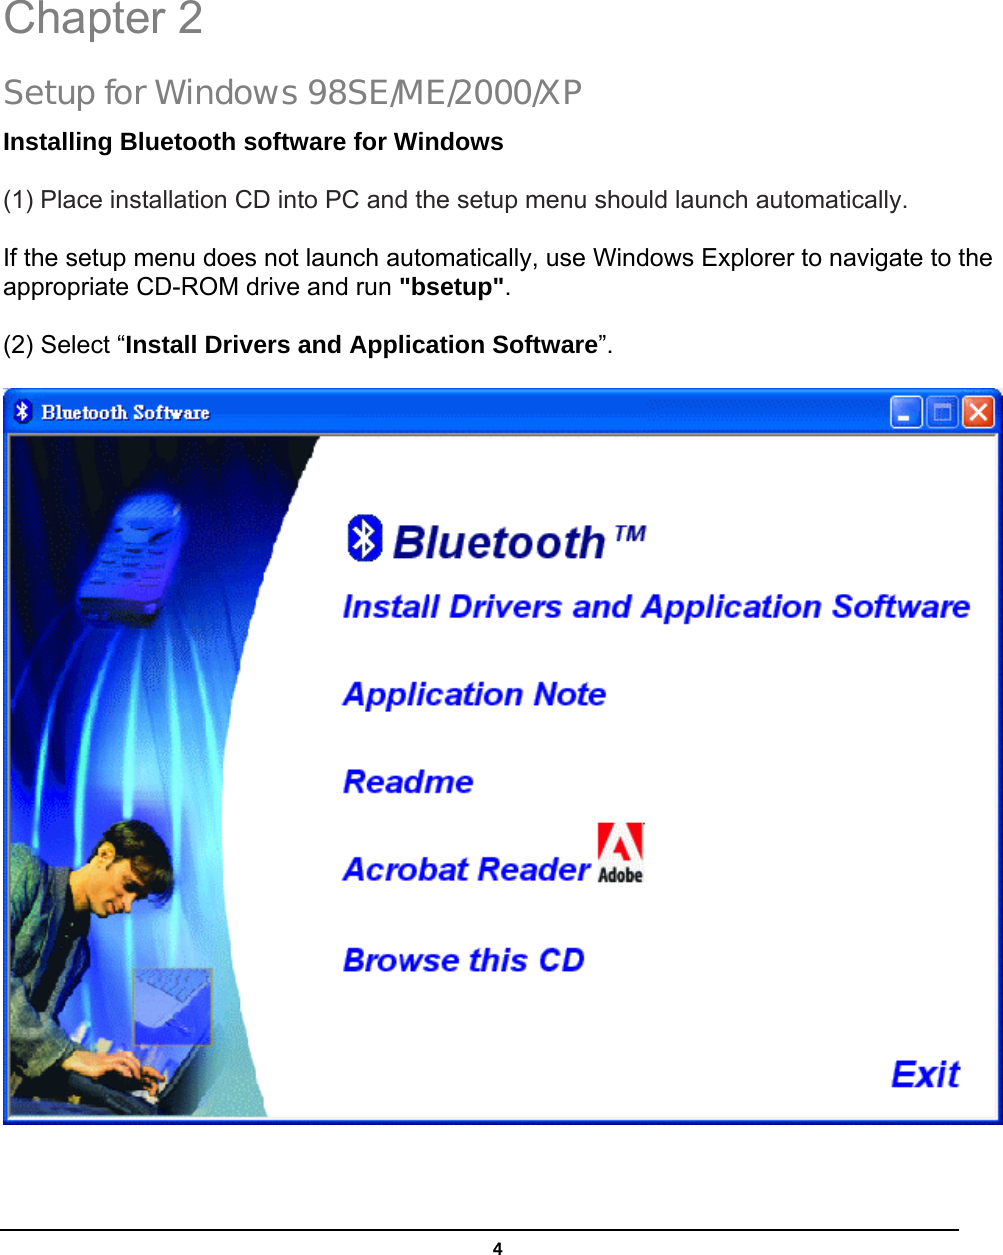   4 Chapter 2 Setup for Windows 98SE/ME/2000/XP Installing Bluetooth software for Windows (1) Place installation CD into PC and the setup menu should launch automatically.  If the setup menu does not launch automatically, use Windows Explorer to navigate to the appropriate CD-ROM drive and run &quot;bsetup&quot;. (2) Select “Install Drivers and Application Software”.  2 